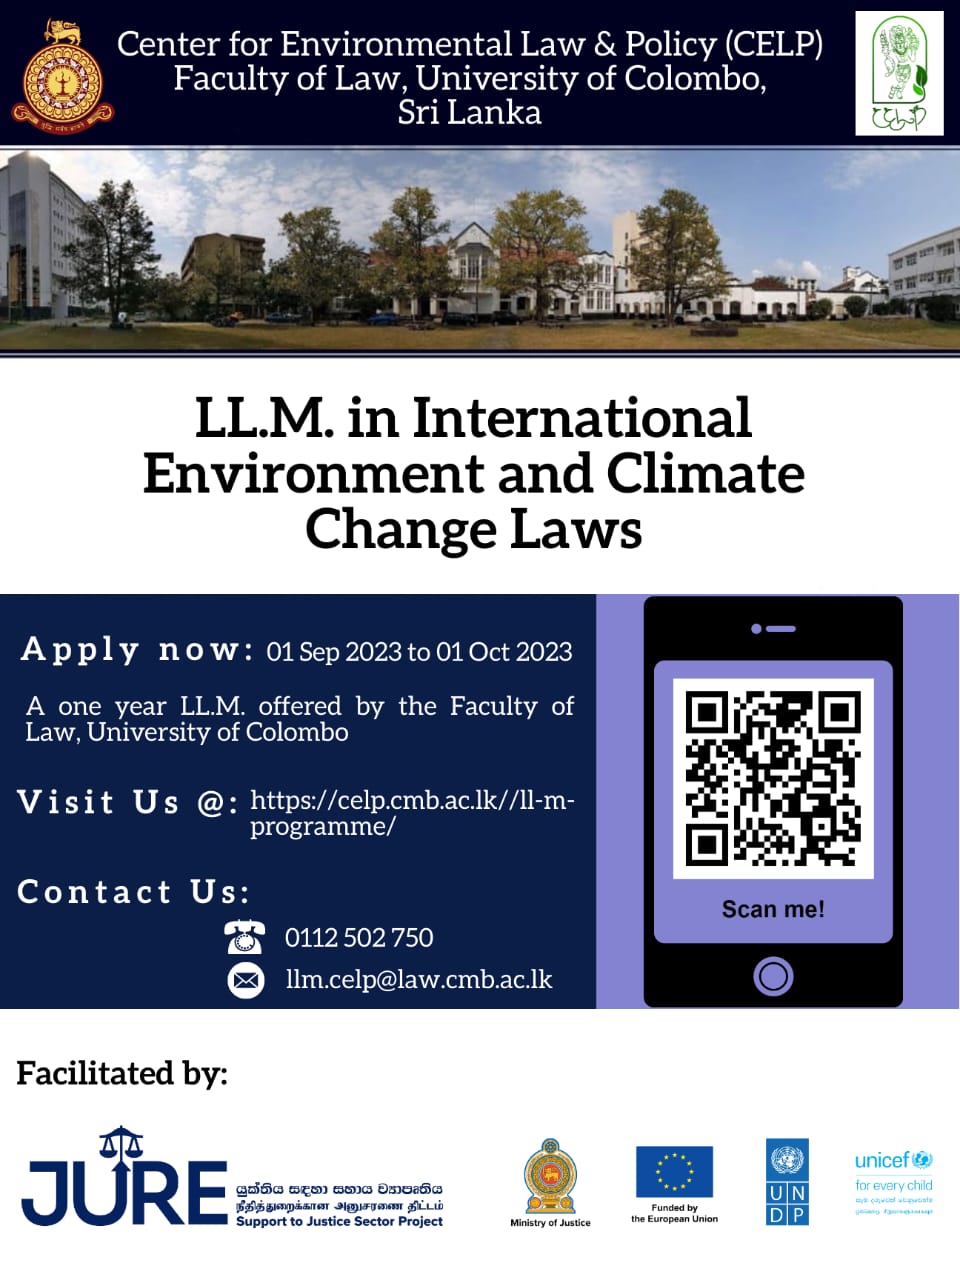 Master of Laws in International Environment and Climate Change Law